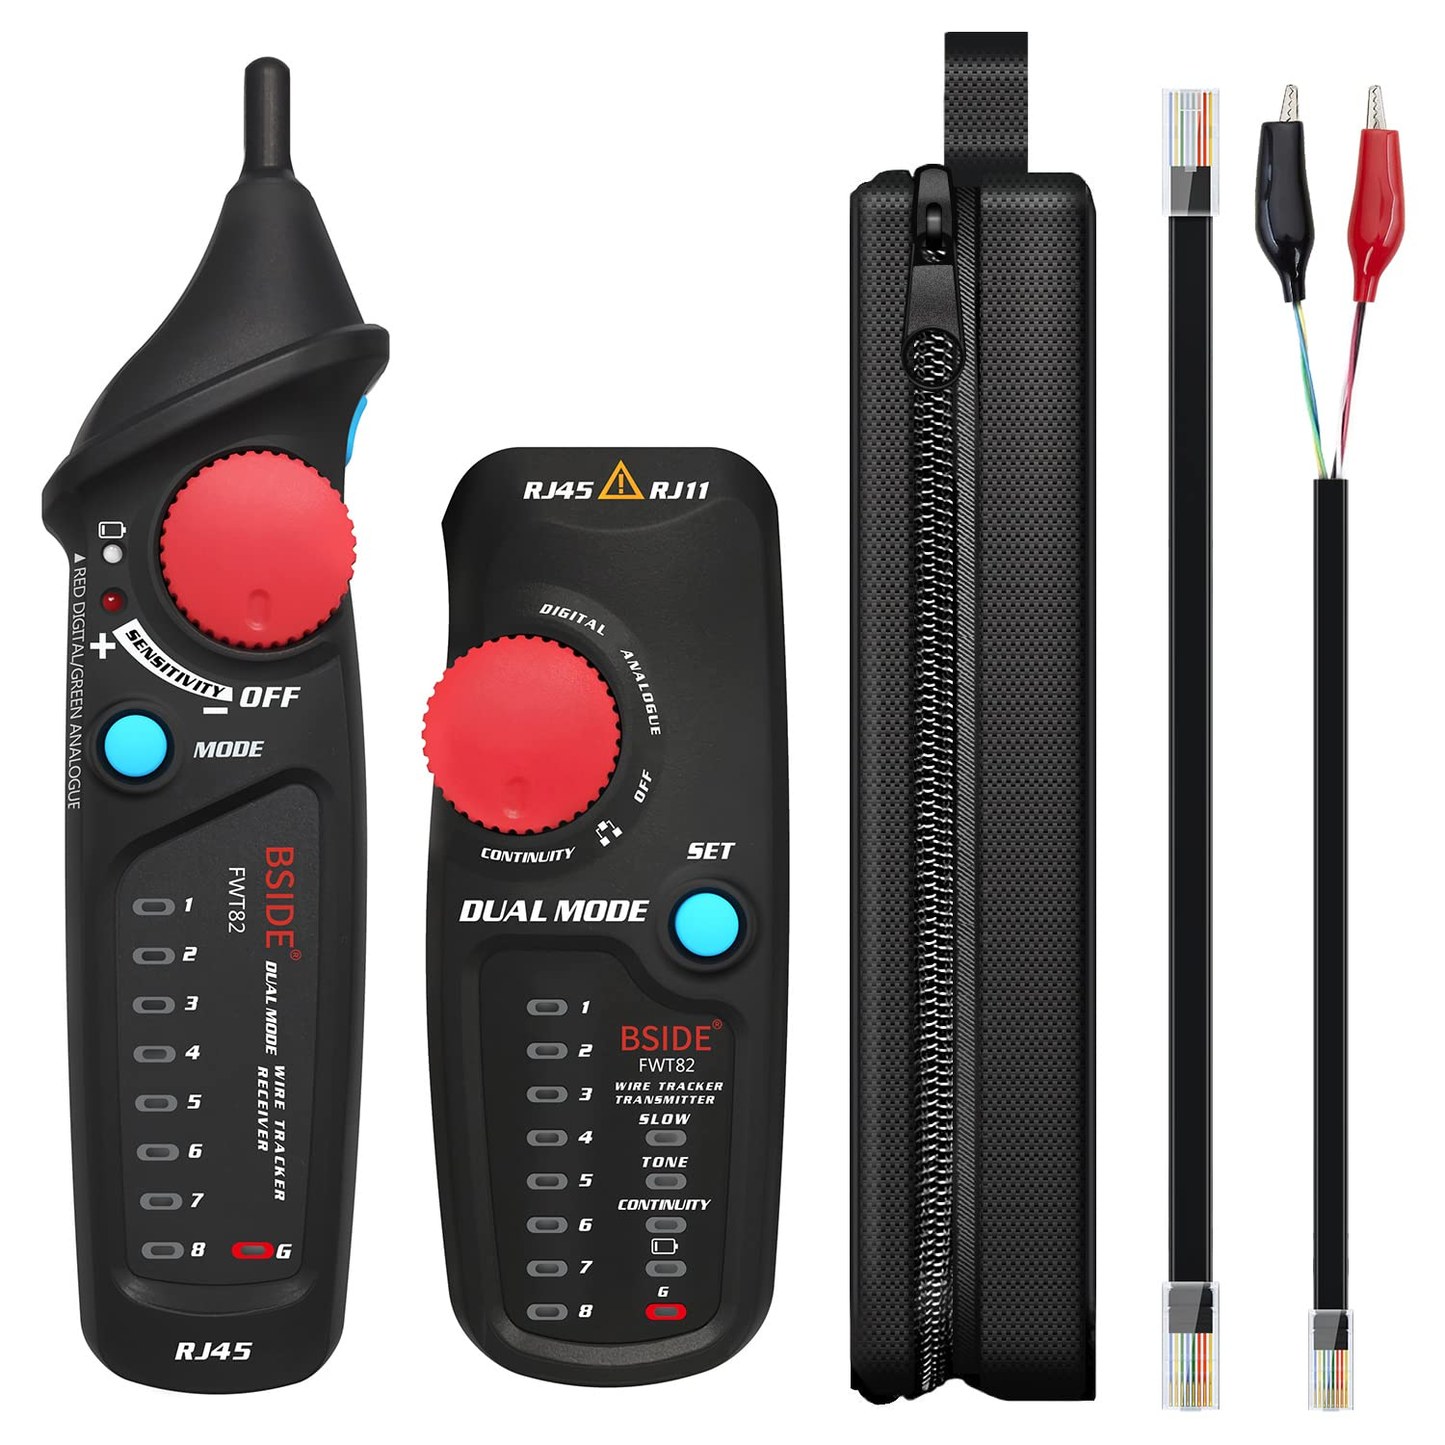 Network Cable Tester & Voltage Detector Kit RJ45 RJ11 Wire Tracker Telephone Line Tester and EBTN Display Voltage Detector Combo Electrical Test Kit, Pocket Size